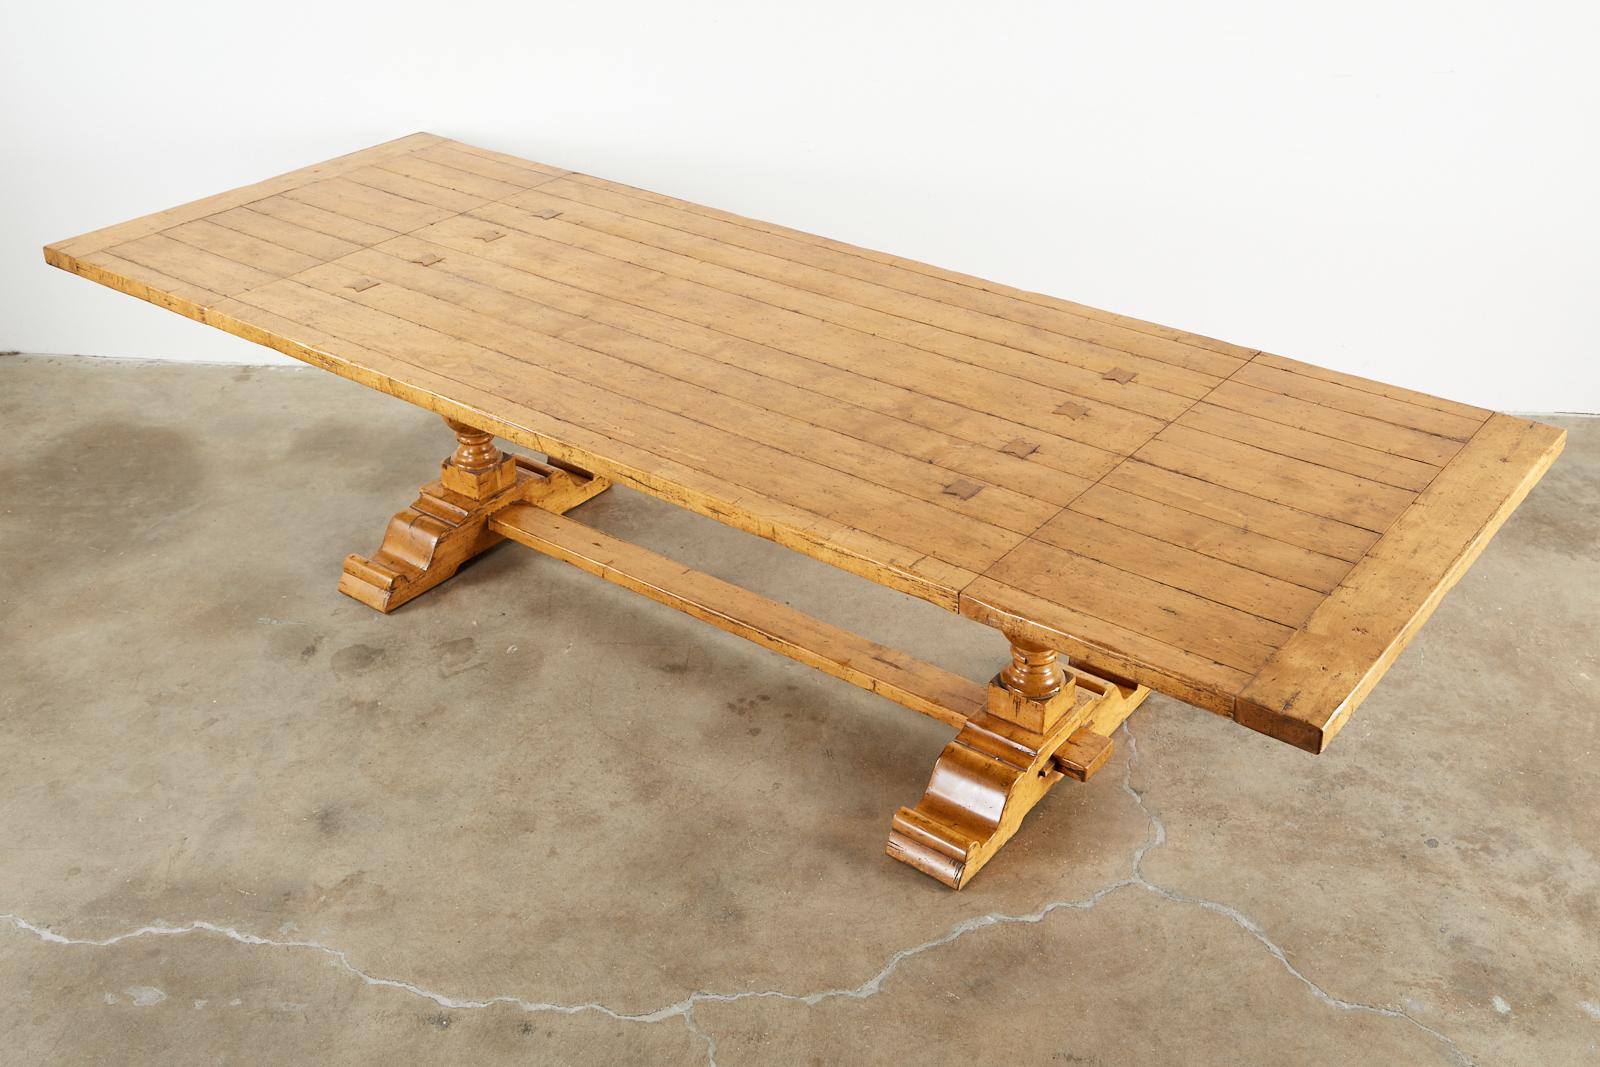 Large double pedestal trestle dining table made by Guy Chaddock. Bespoke table constructed from maple with an intentionally distressed finish and patina. Made in the country English style with two matching leaves that extend the table from 84 inches